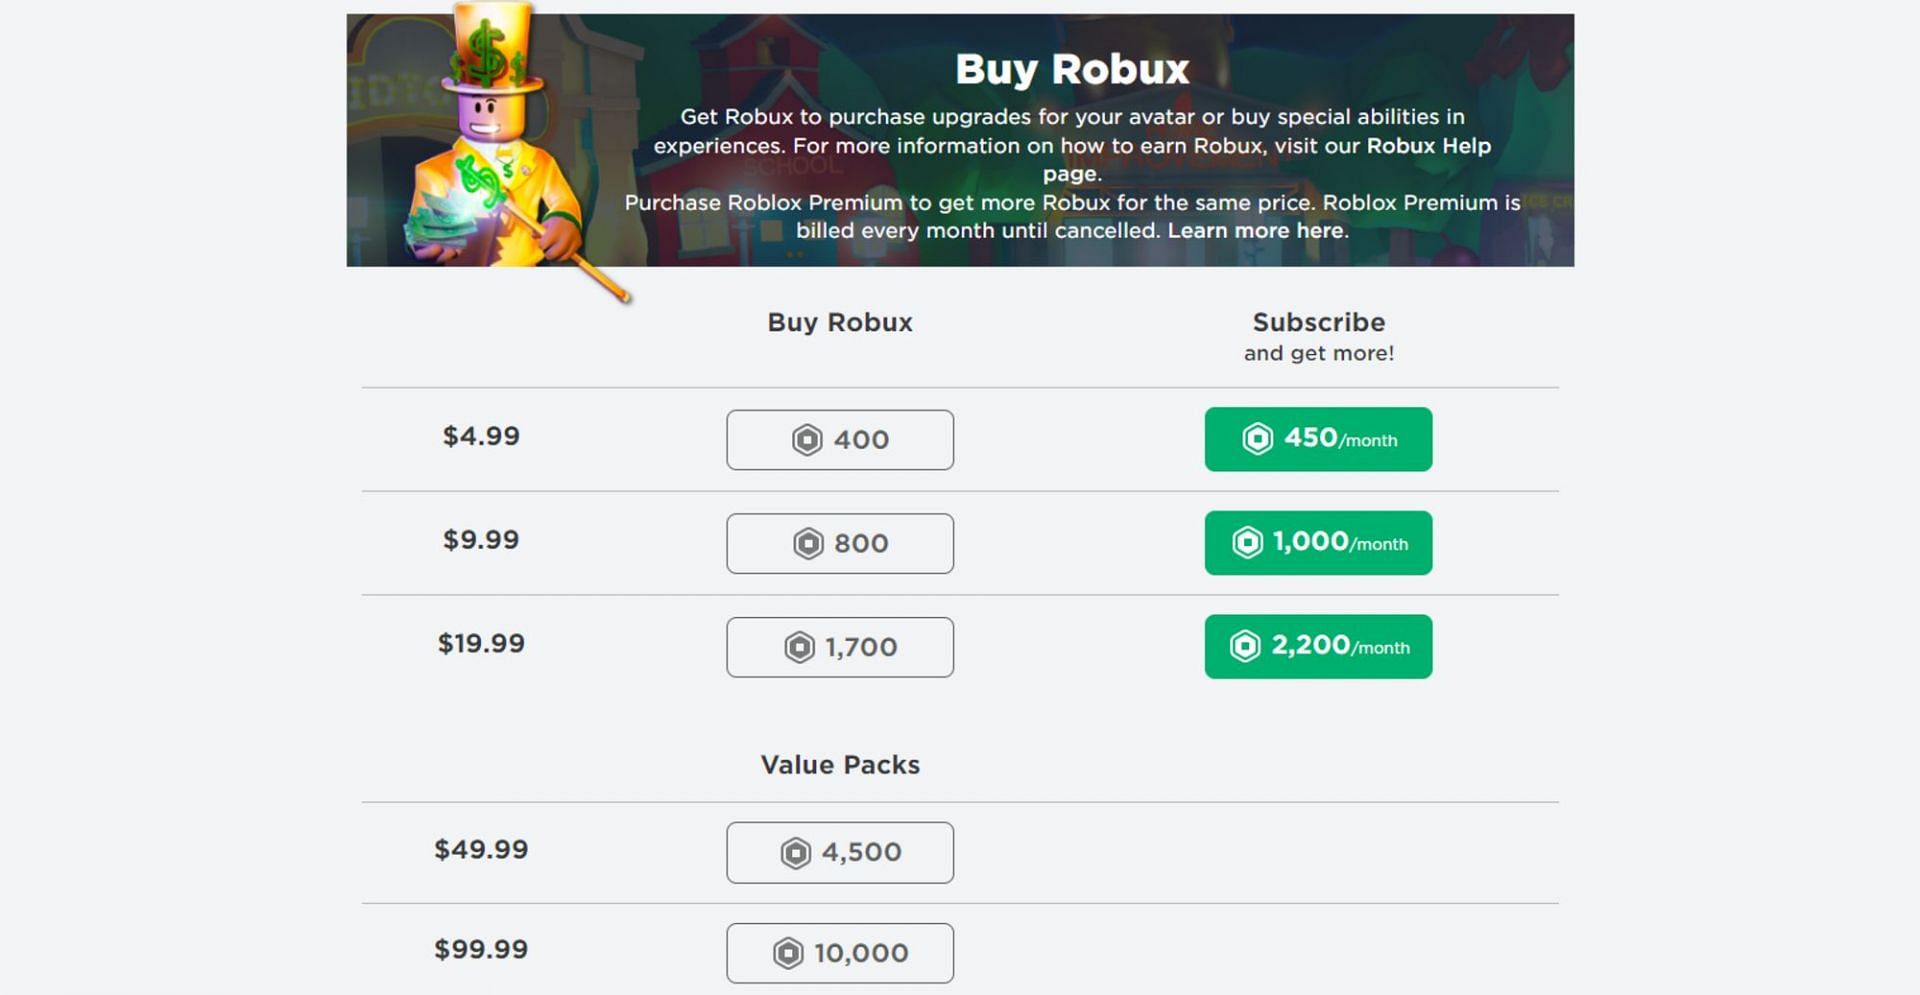 How Many Robux Can You Get For $100 In Roblox?